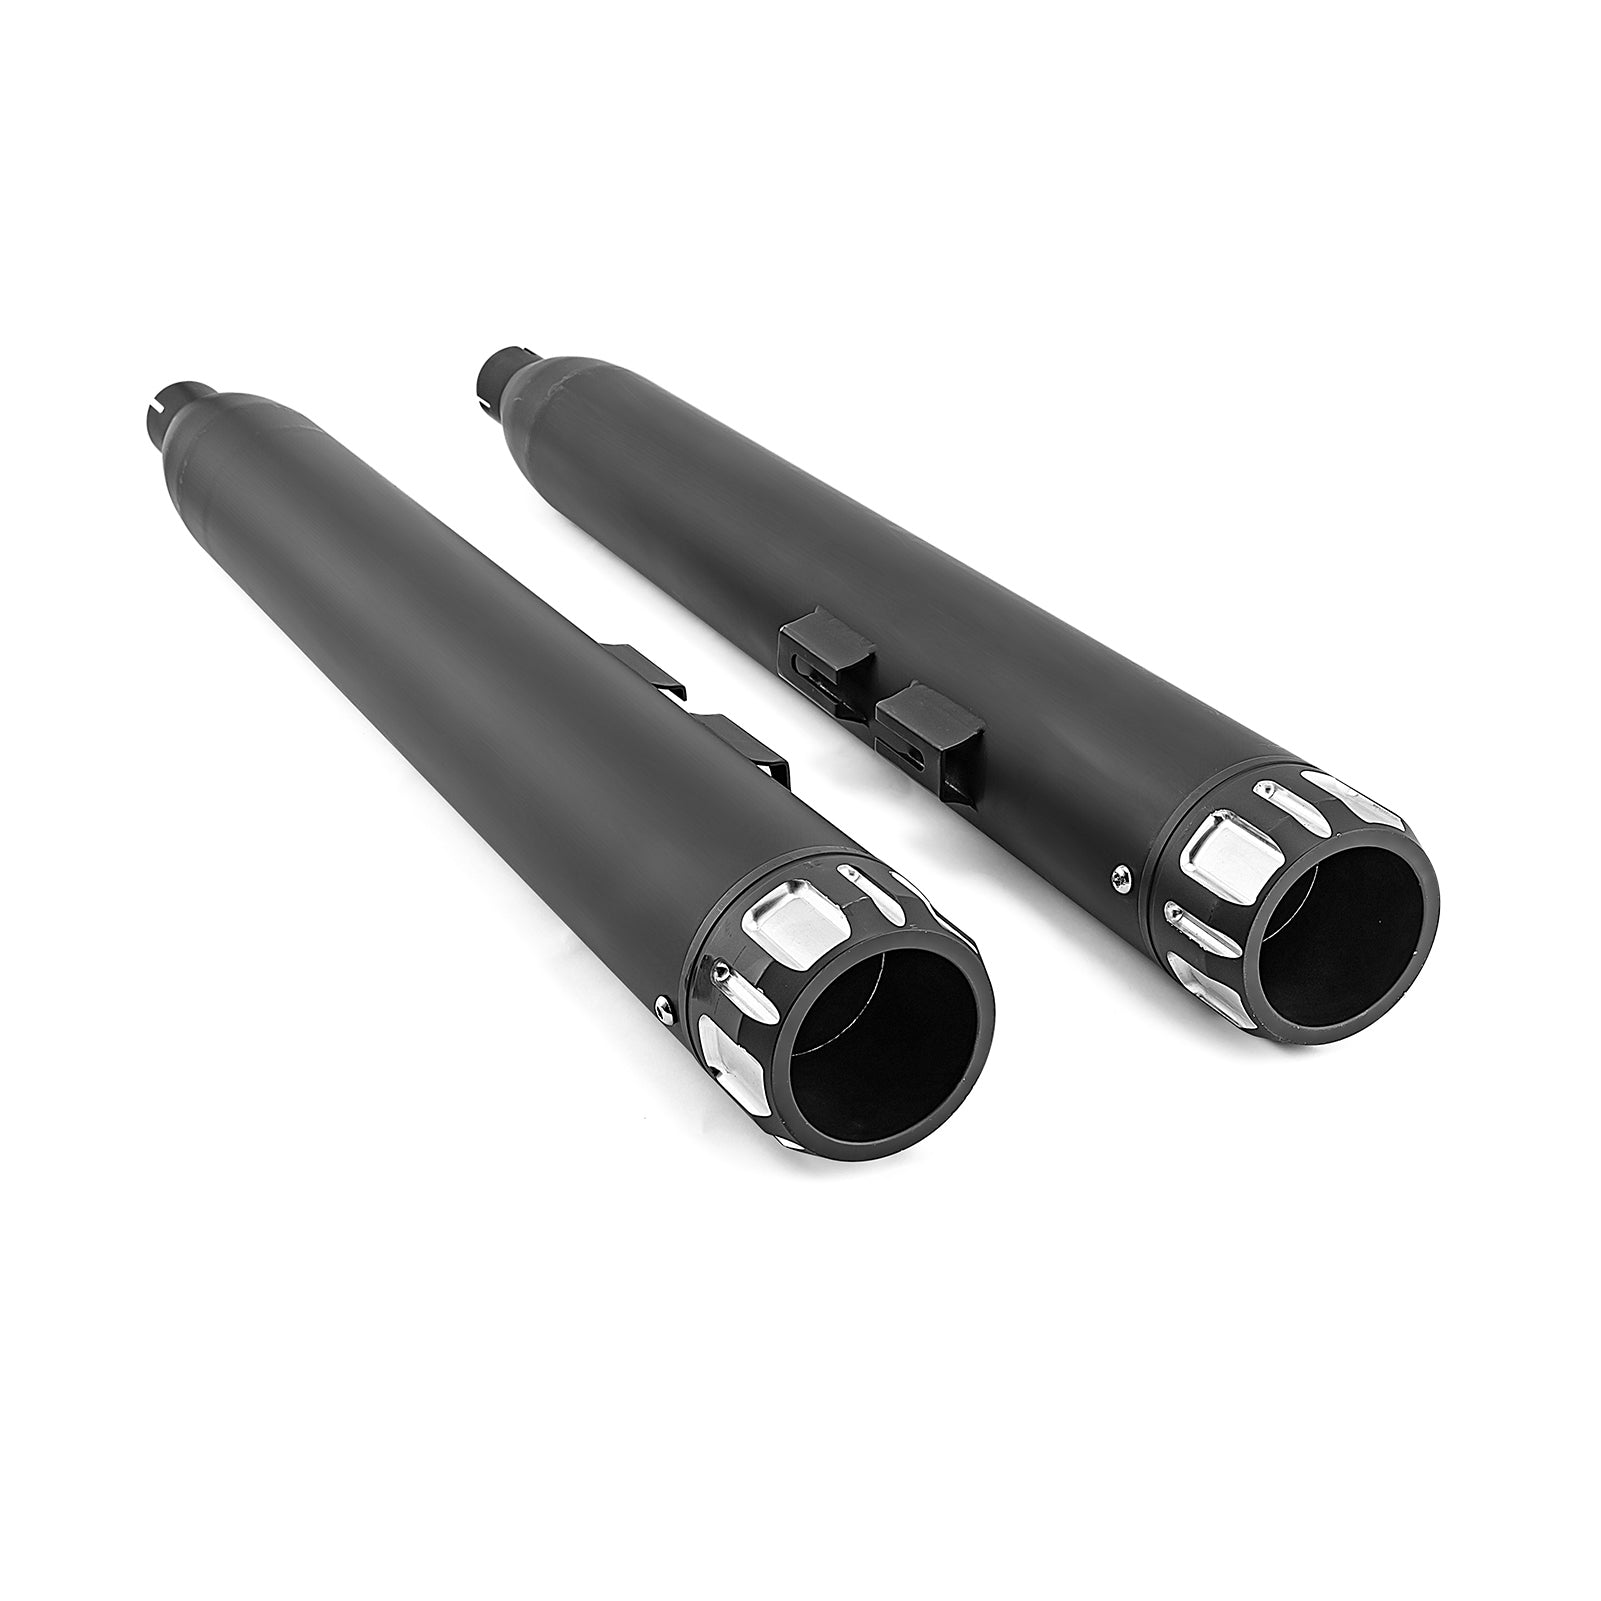 Chrome 3.5" Slip-On Mufflers Exhaust, Exhaust Pipes For 1995-2016 Harley Davidson Touring